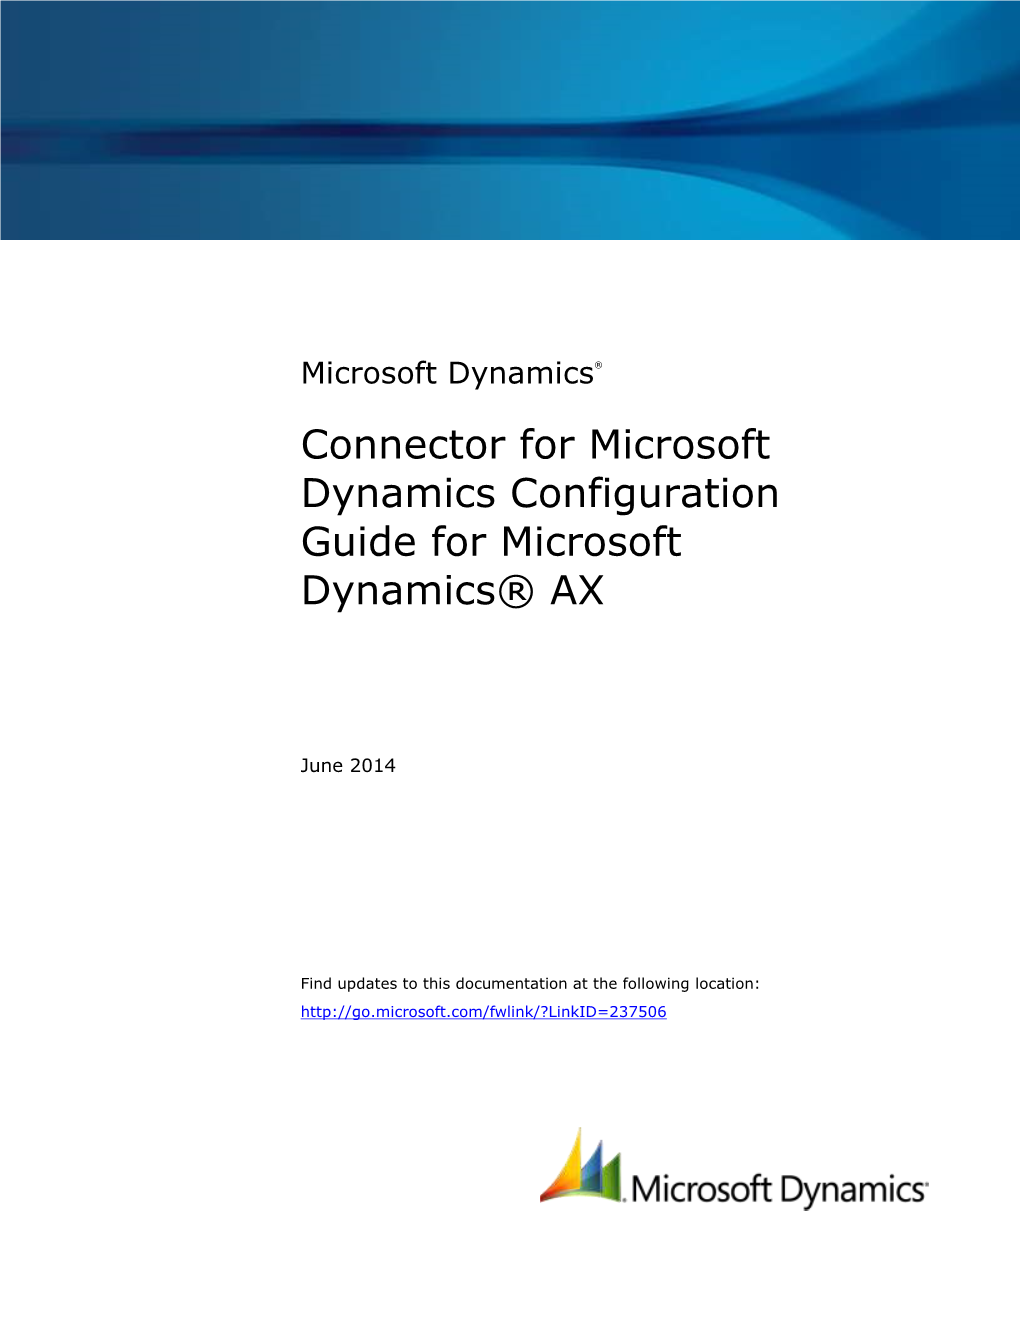 Connector for Microsoft Dynamics Configuration Guide for Microsoft Dynamics® AX